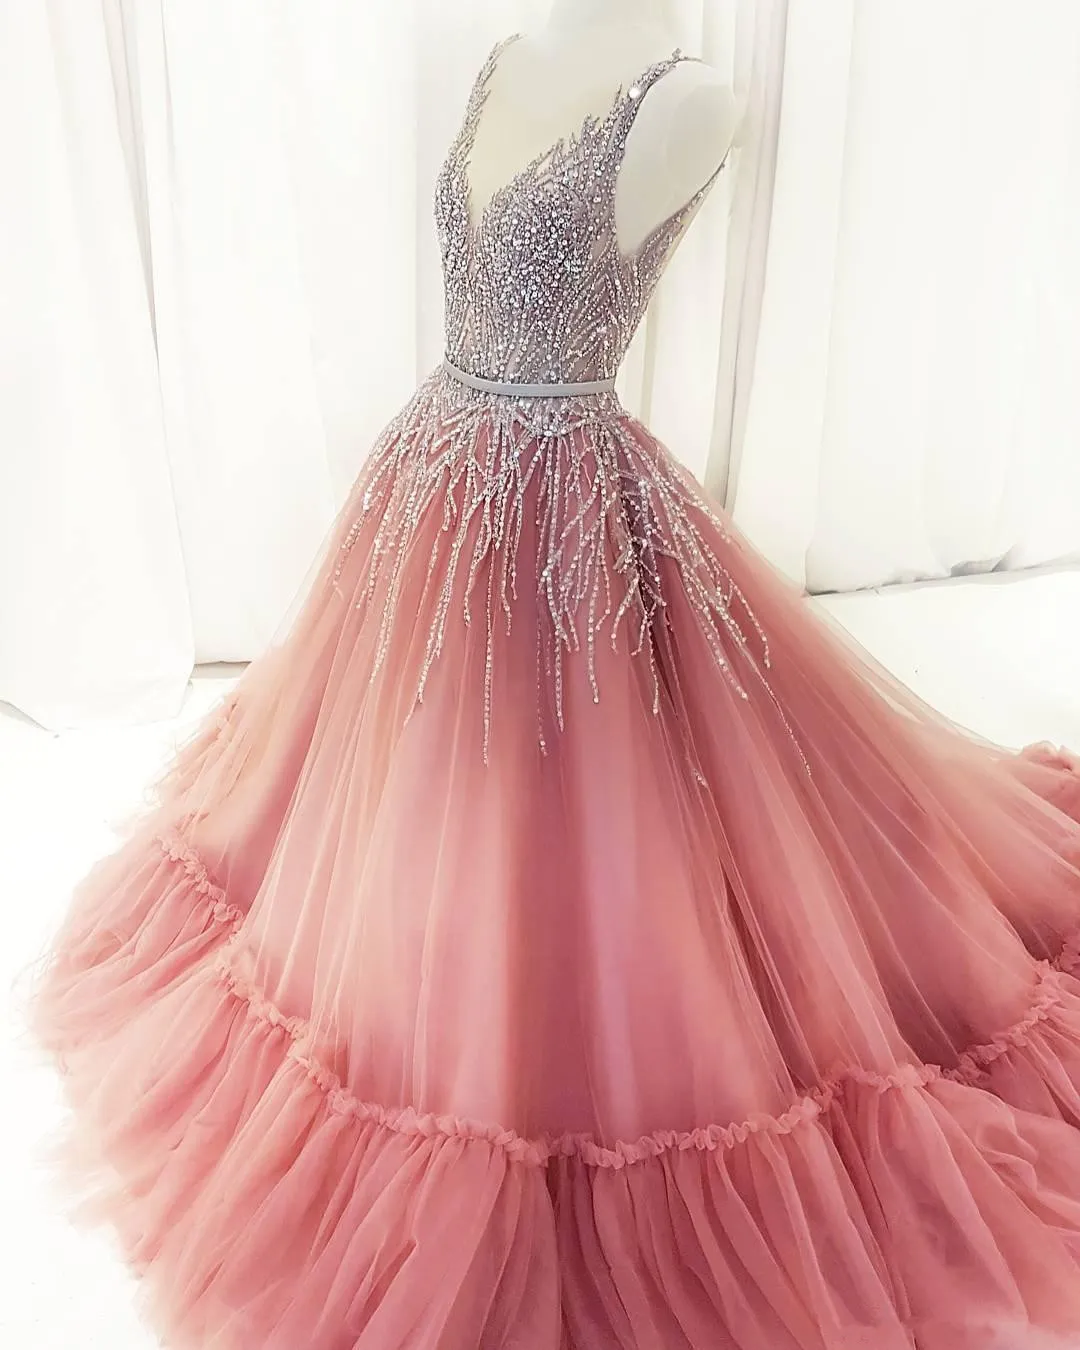 Sparkly Sequins Ball Gown Prom Dresses Blush Beaded V Neck Evening Gowns Dubai Party Dress robe de soiree